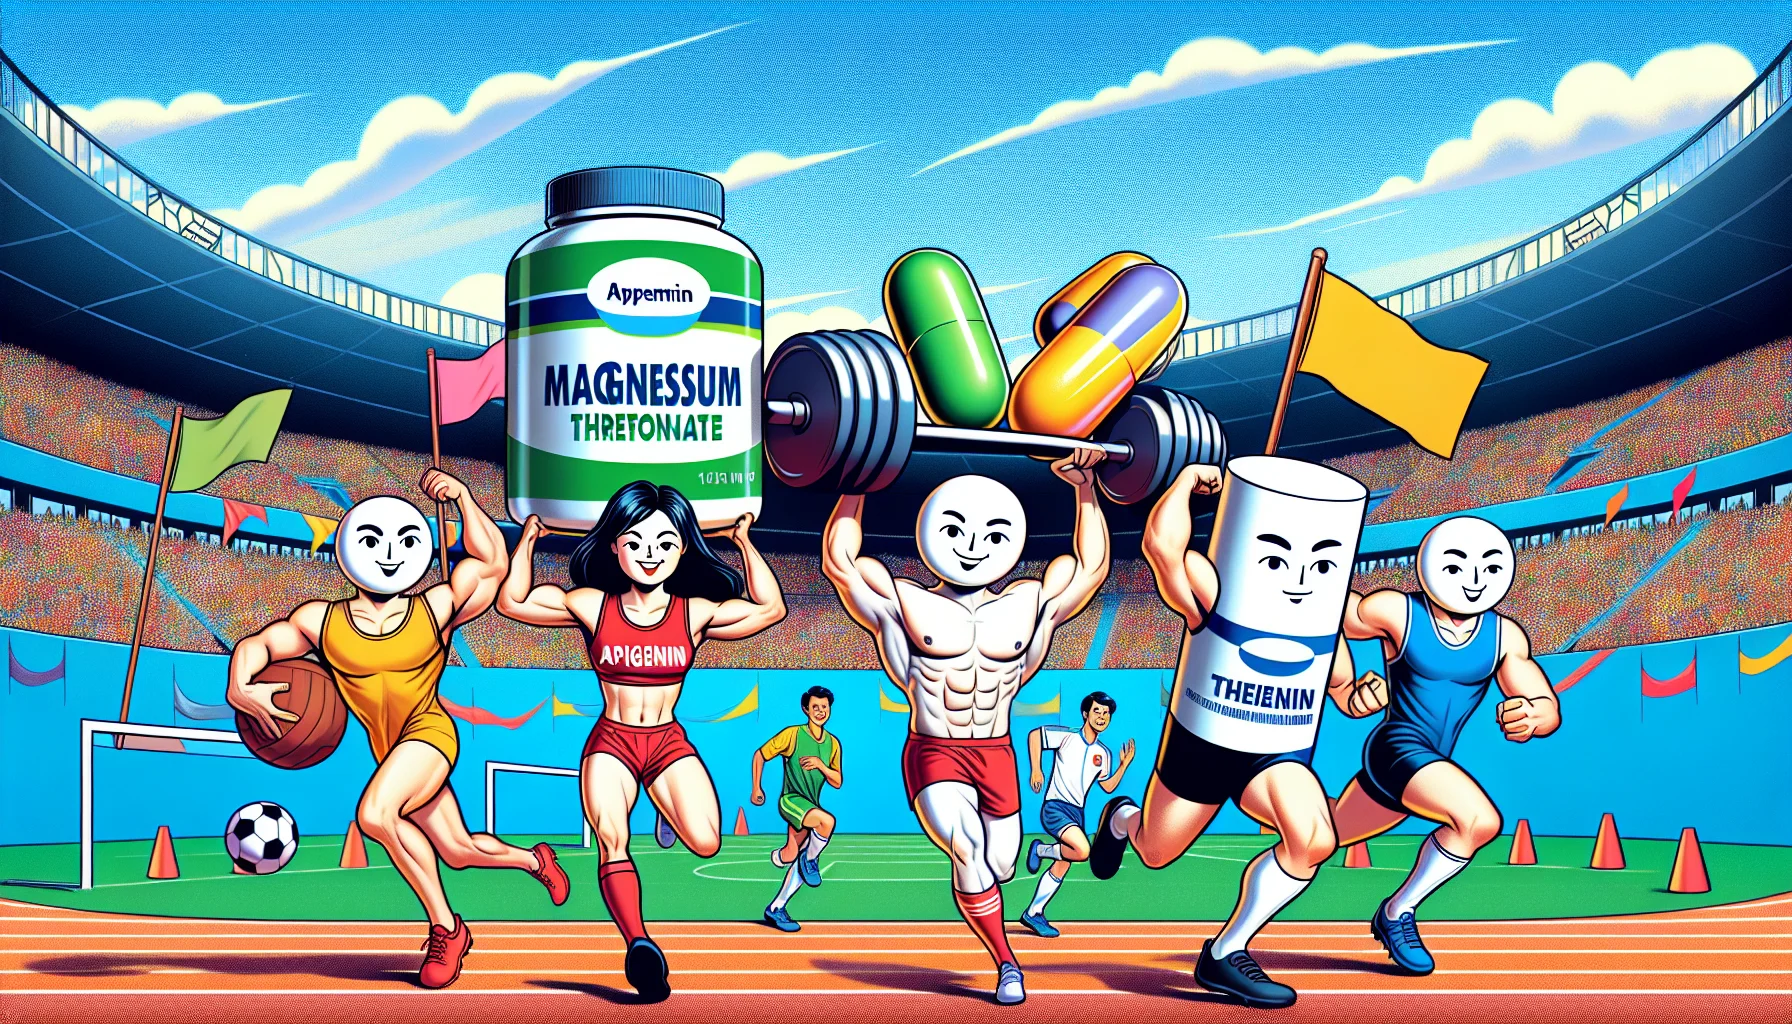 Imagine an upbeat and colorful scene, inspired by a comic strip. In the center, there is a group of anthropomorphized dietary supplements - magnesium threonate, apigenin, and theanine - each represented by a different silhouette. They have captivating facial expressions that resemble healthy, enthusiastic and determined athletes. They are participating in various sports activities. Magnesium threonate, portrayed as a Caucasian male with lean physique, is lifting a massive weight. Apigenin, depicted as an Asian female soccer player, is skillfully dribbling a soccer ball. Theanine, represented as a Middle-Eastern male sprinter, is speedily running a race. The setting is a vibrant sports stadium filled with colorful banners and a lively crowd.